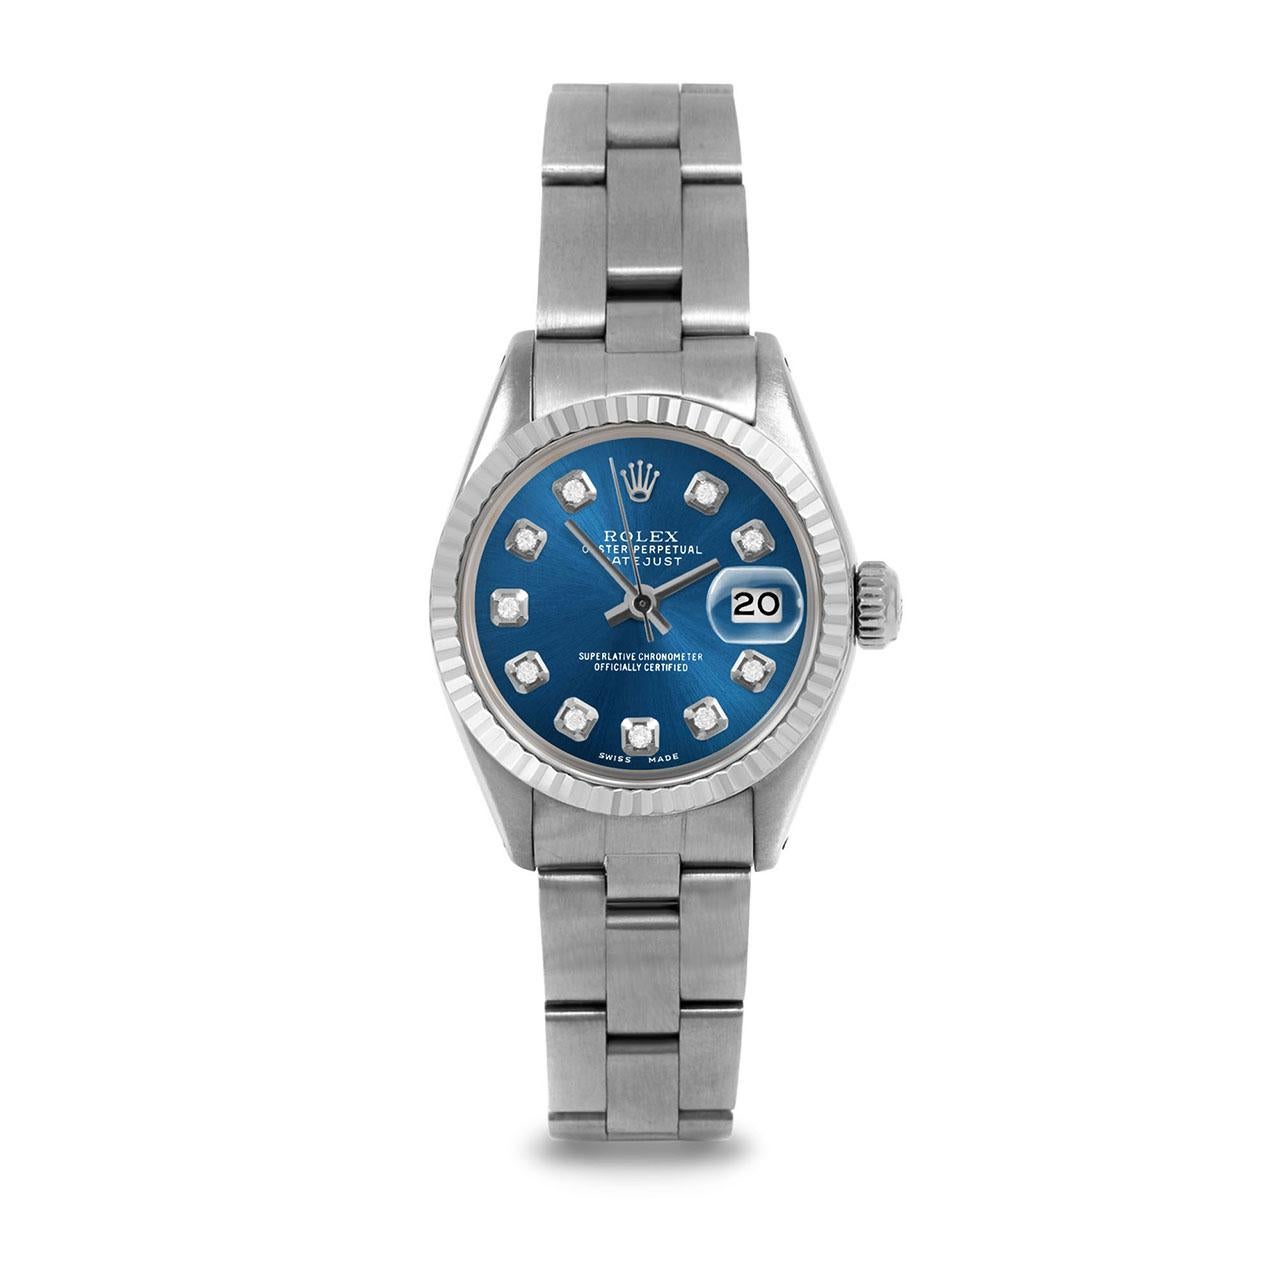 Pre-Owned Rolex 6917 Ladies 26mm Datejust Watch, Custom Blue Diamond Dial & Fluted Bezel on Rolex Stainless Steel Oyster Band.   

SKU 6917-SS-BLU-DIA-AM-FLT-OYS


Brand/Model:        Rolex Datejust
Model Number:        6917
Style:       